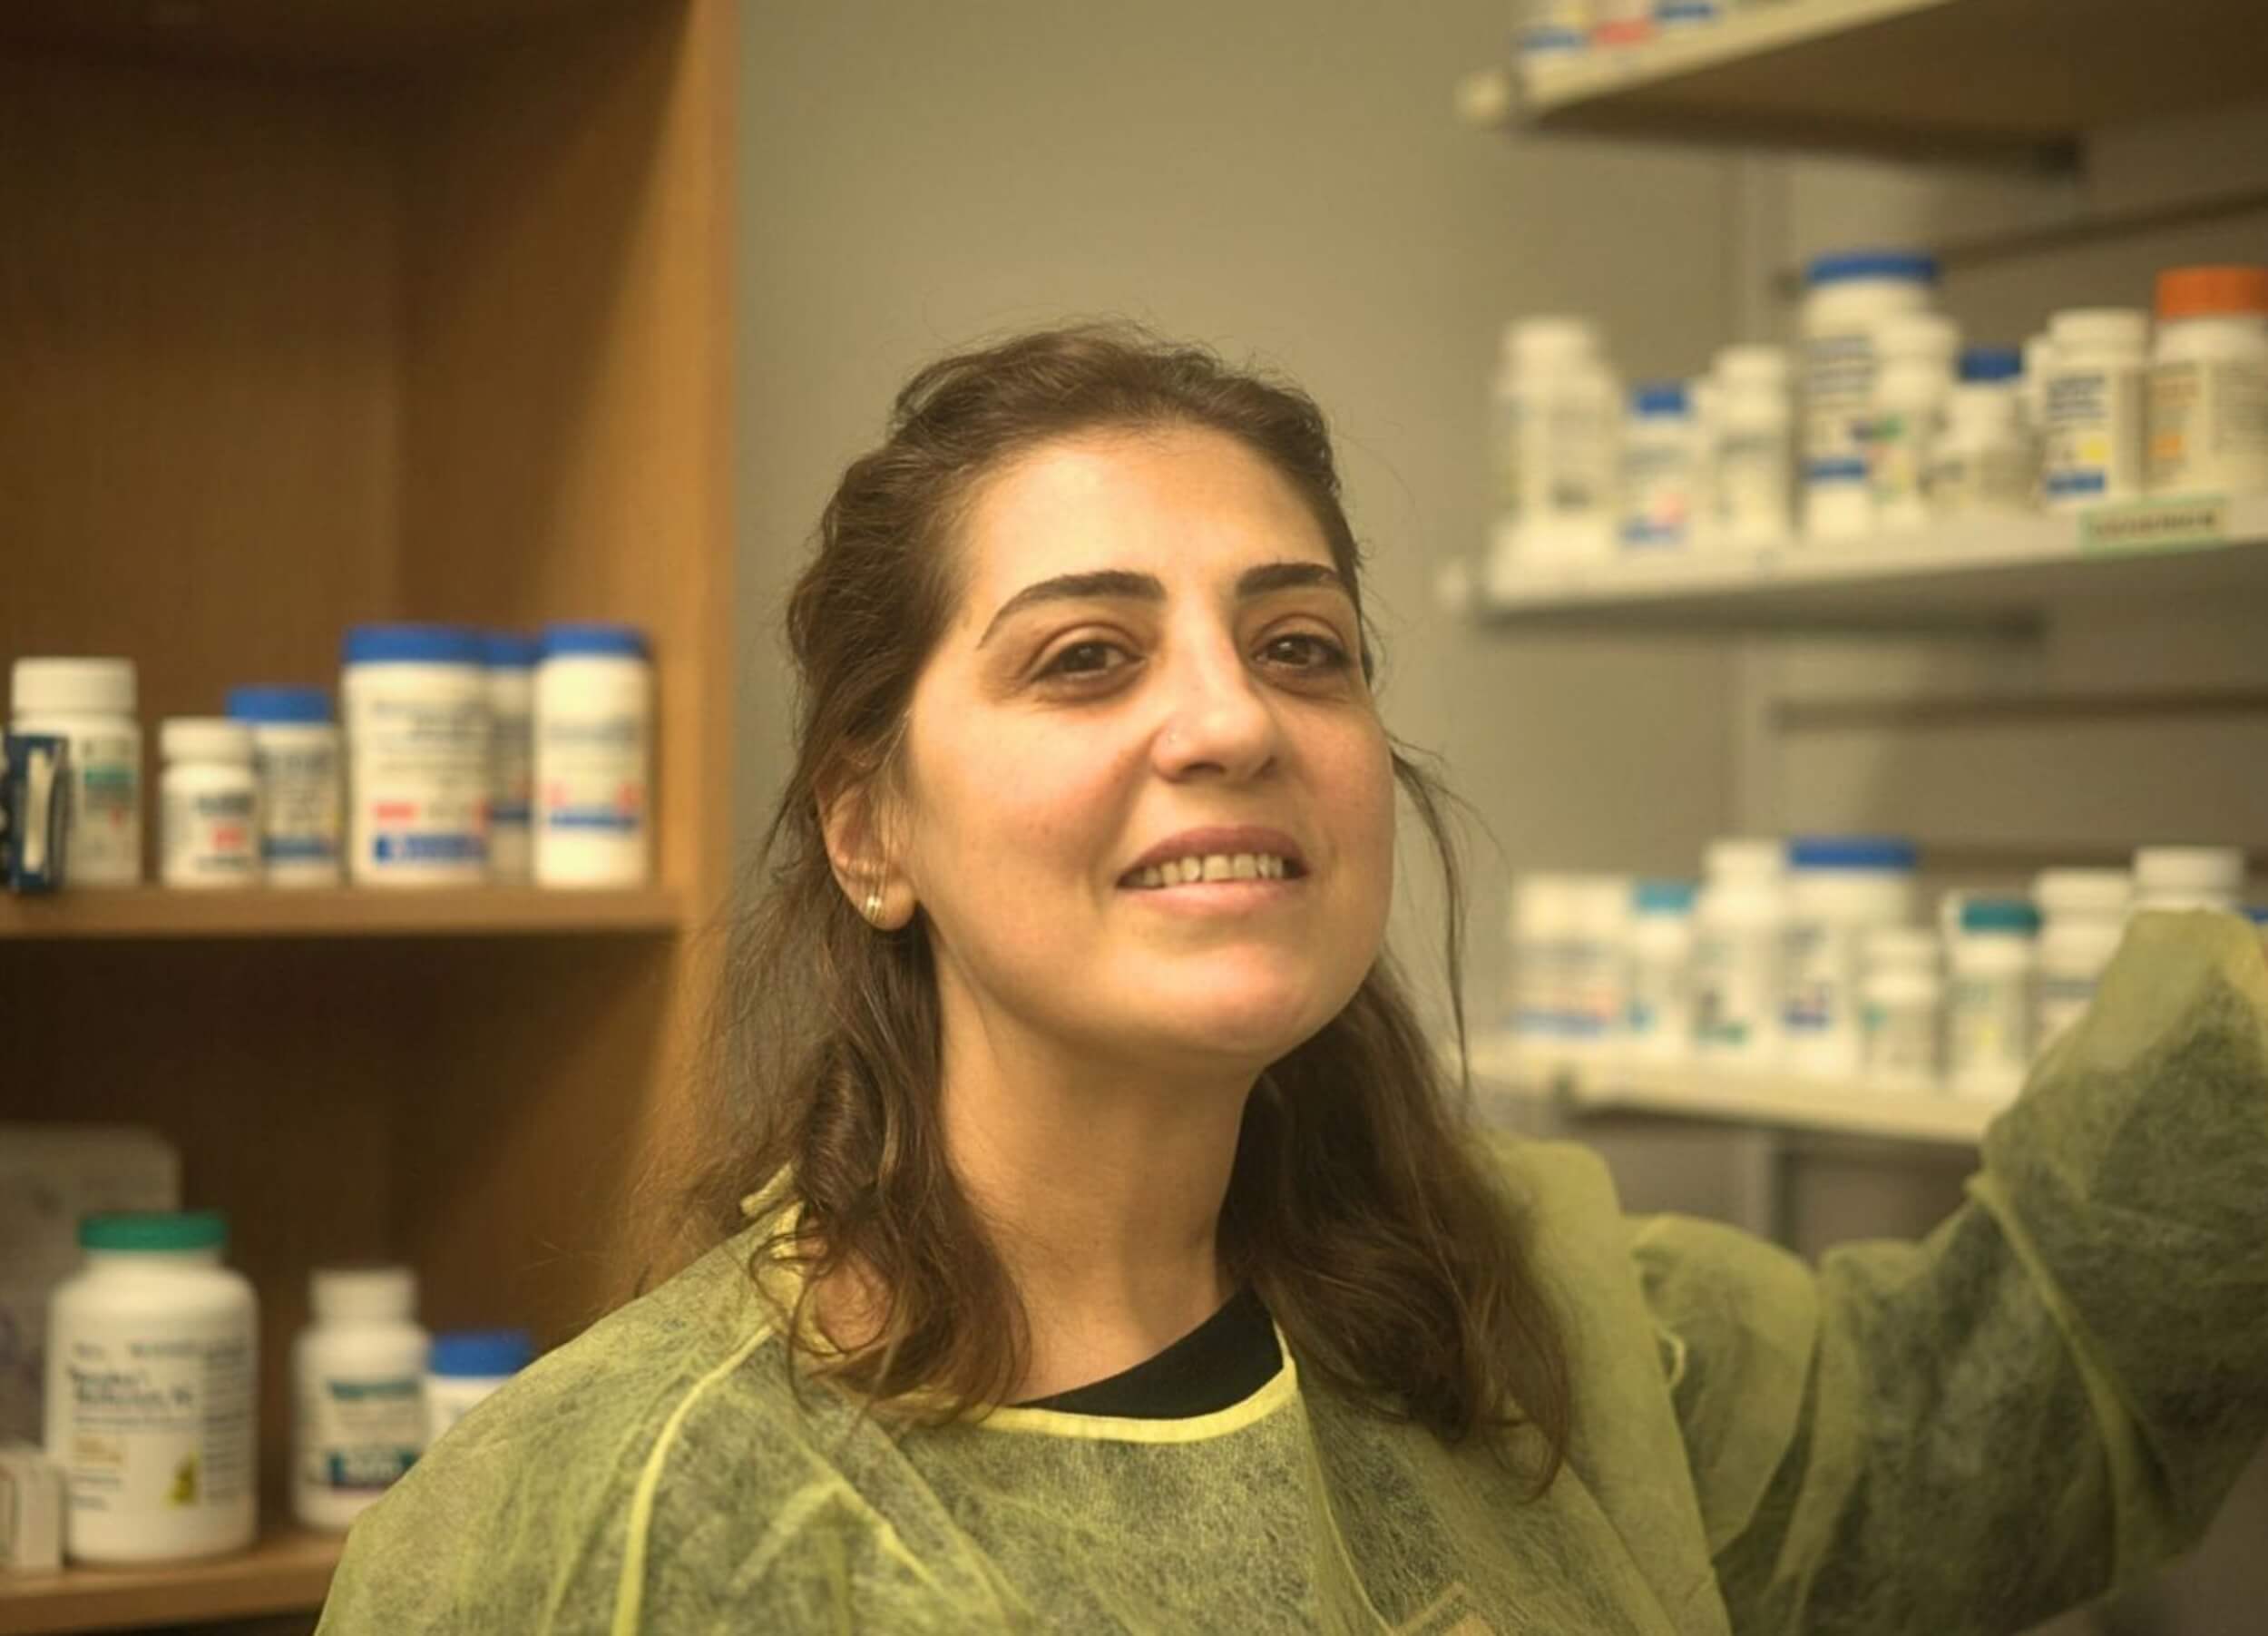 A Pharmacy Assistant course student posing in front of medications on shelves